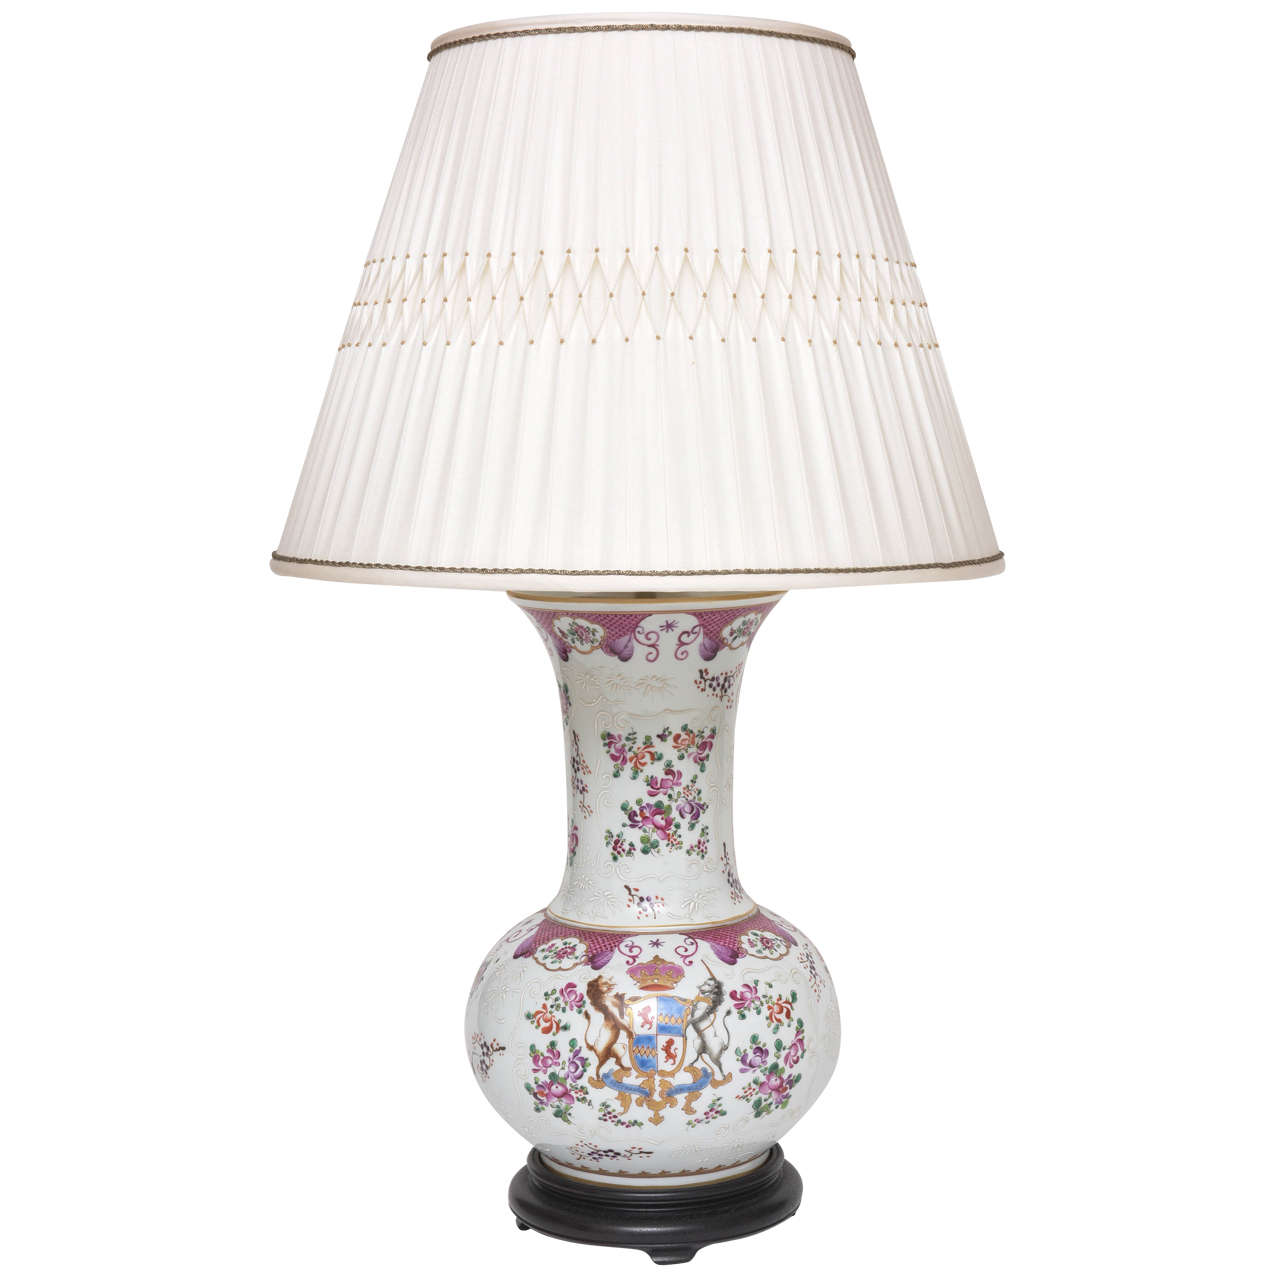 Samson "Chinese Export" Porcelain Armorial Vase Mounted as a Lamp